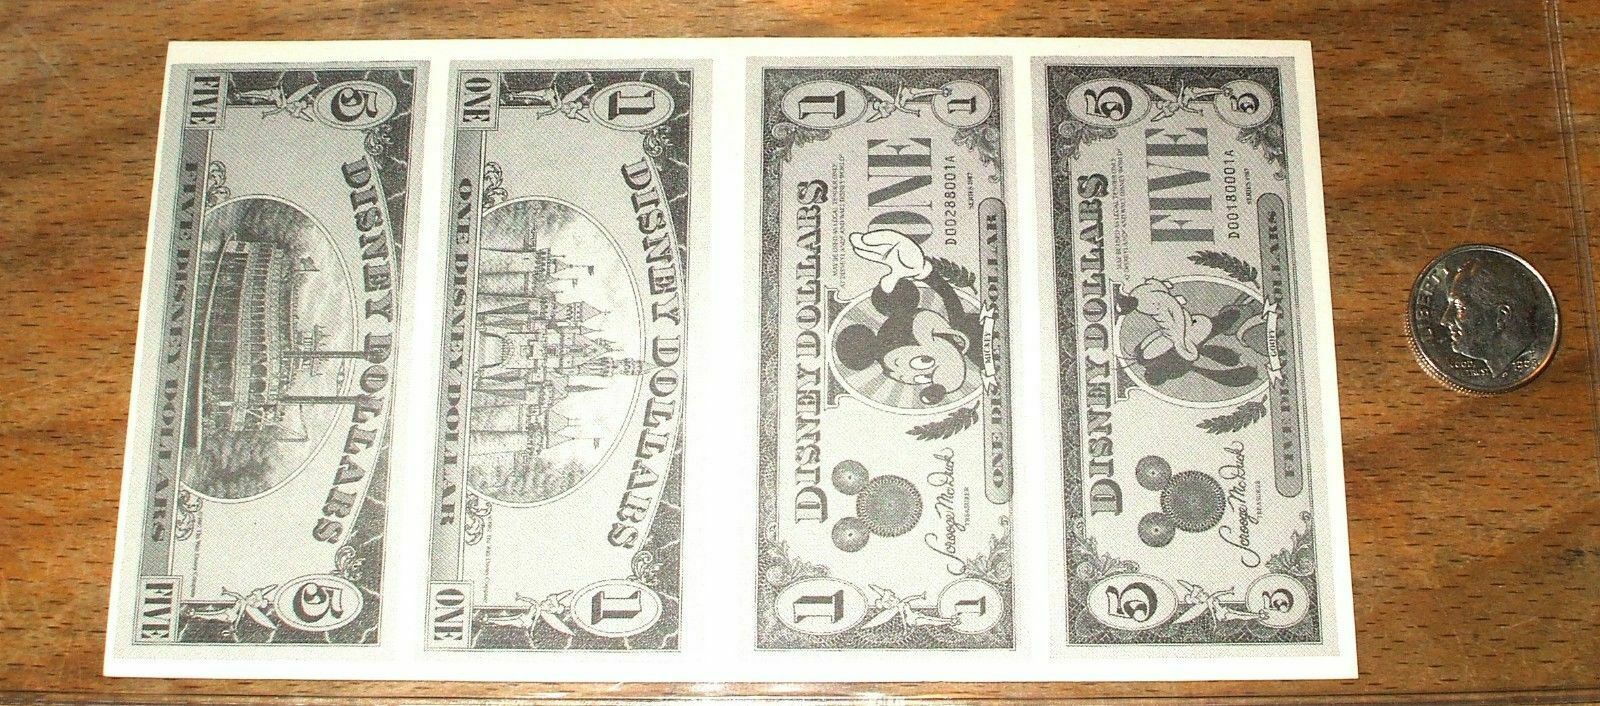 Primary image for 1987 DISNEY DOLLAR FACTS CARD - KEY FACTS FOR DISNEY DOLLARS